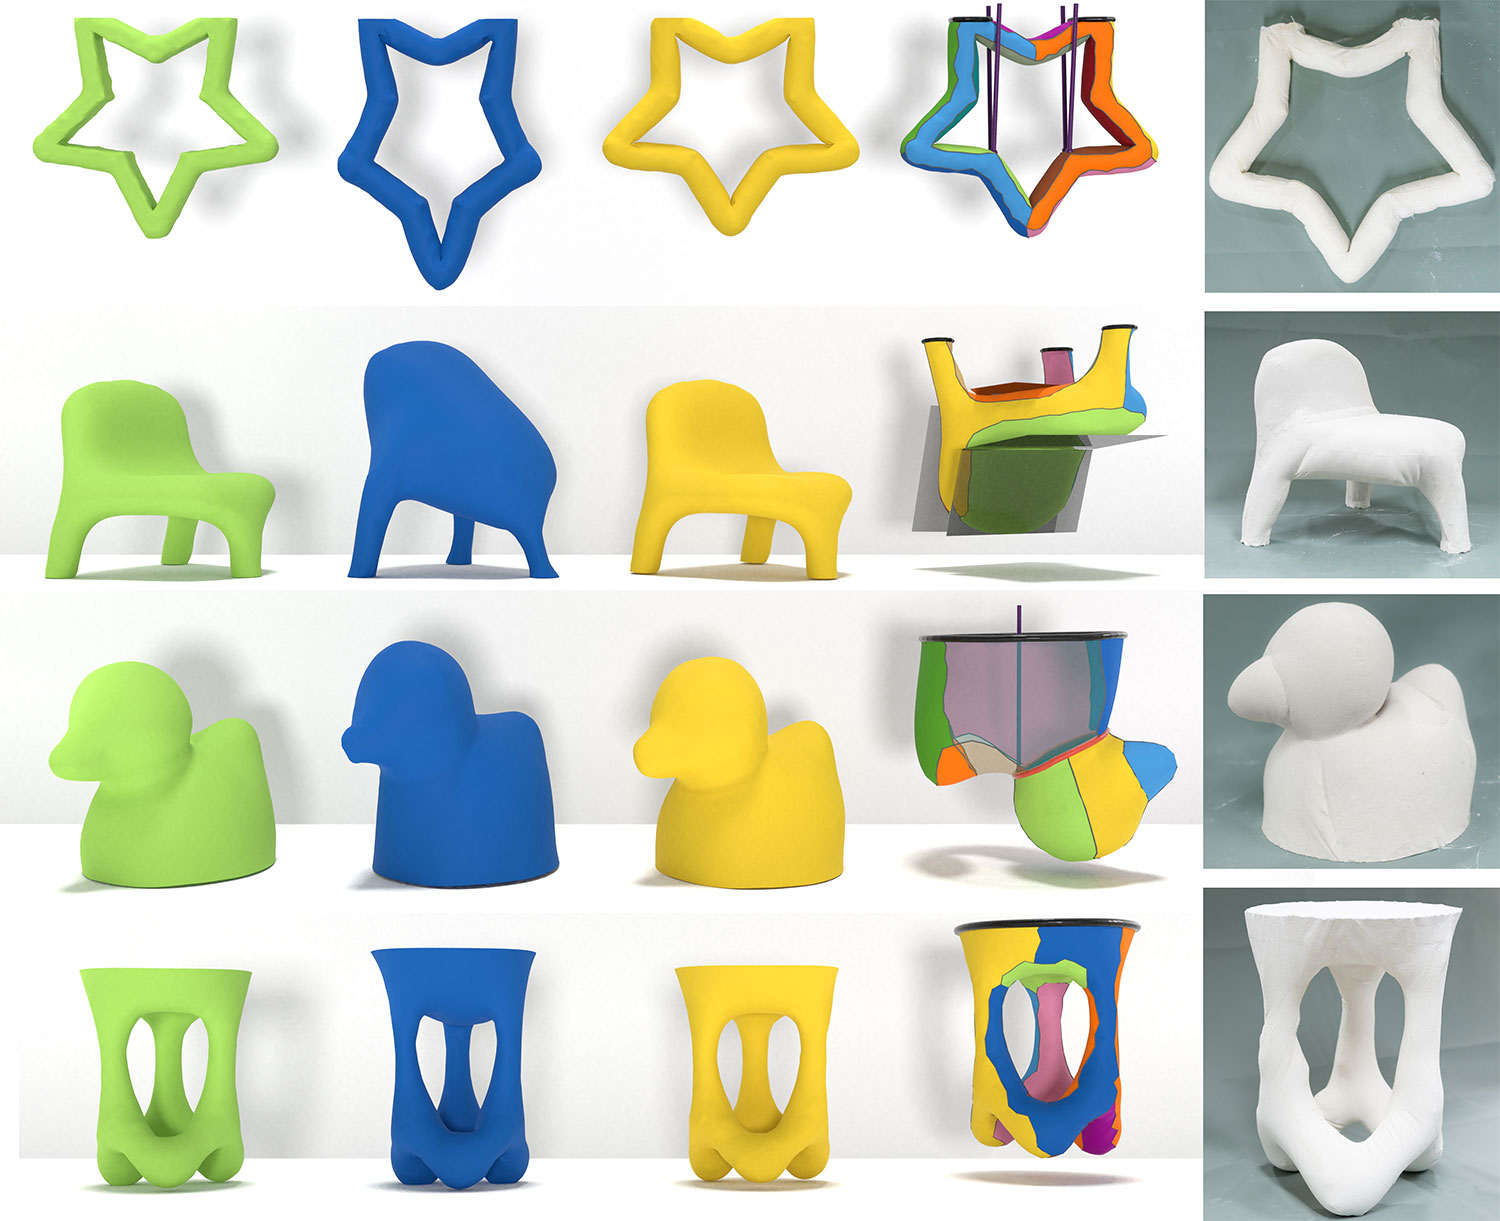 Composite photo grid showing 4 fabric formwork molds constructed using the computational design algorithms created by Emily Whiting and Xiaoting Zhang. 4 color versions of each model are shown next to the base model.